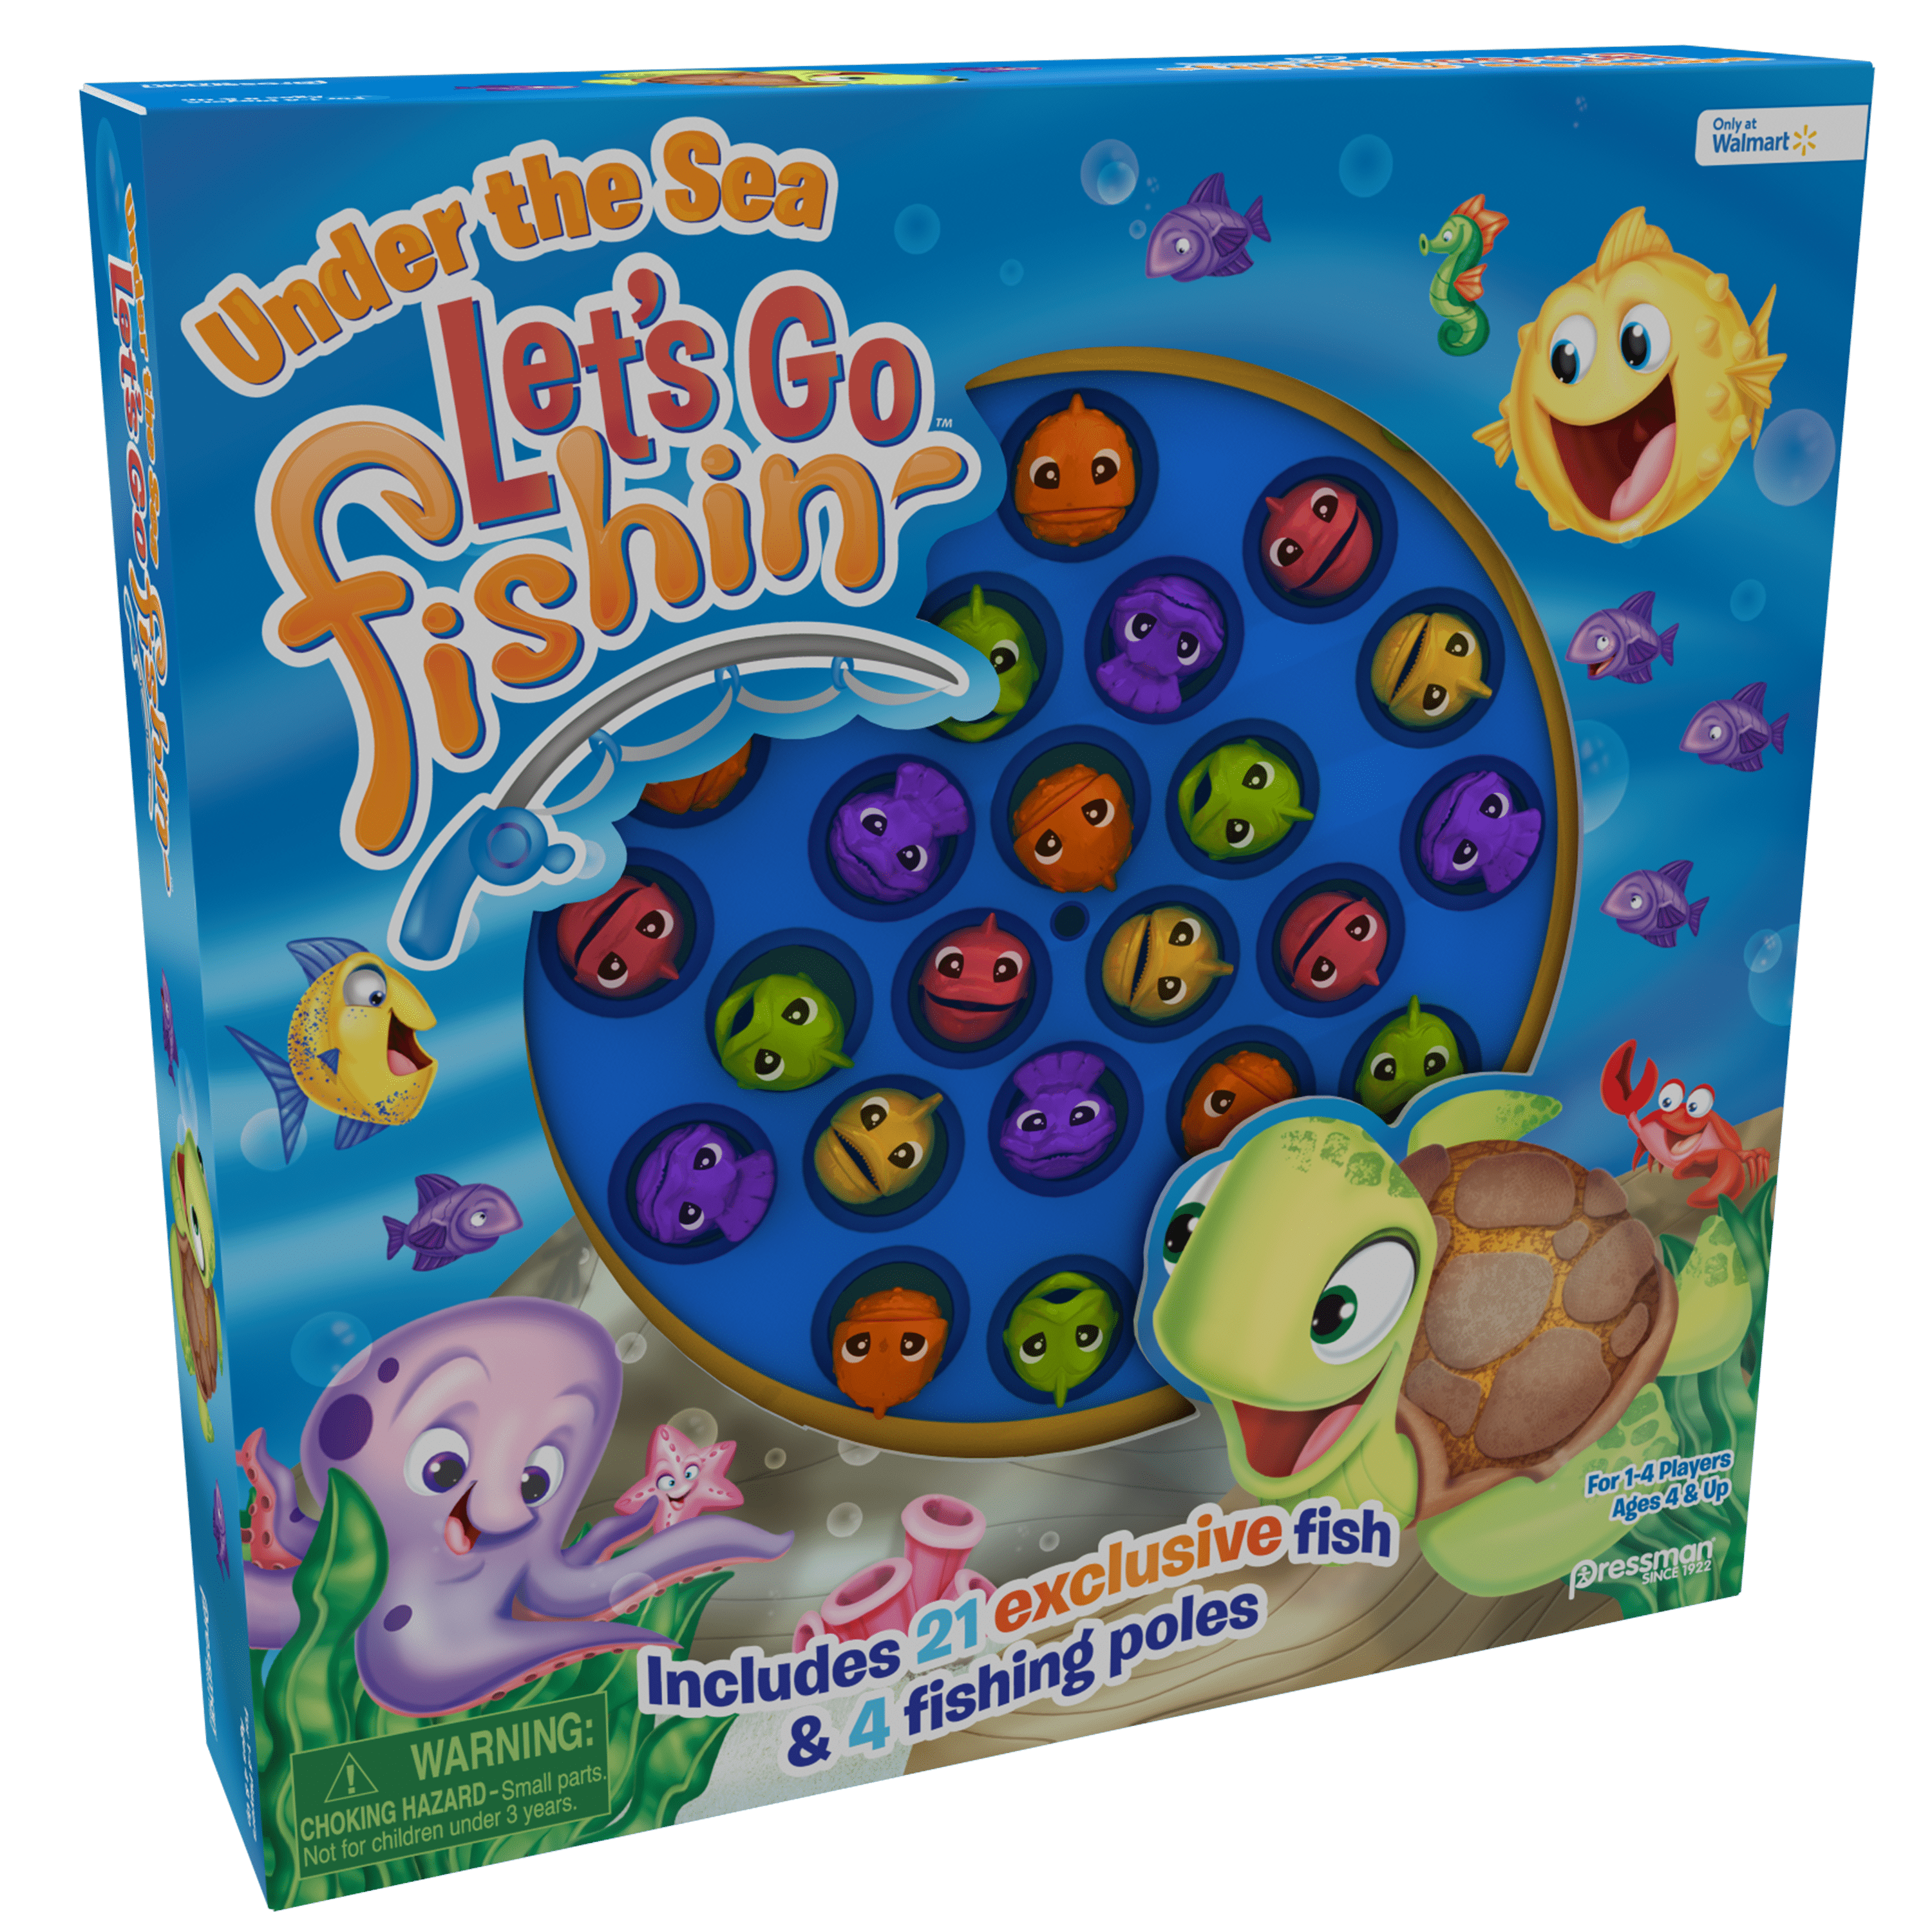 Let's Go Fishin' Fishing Toy Classic Board Game for Kids Age 4 Pressman 2015 for sale online